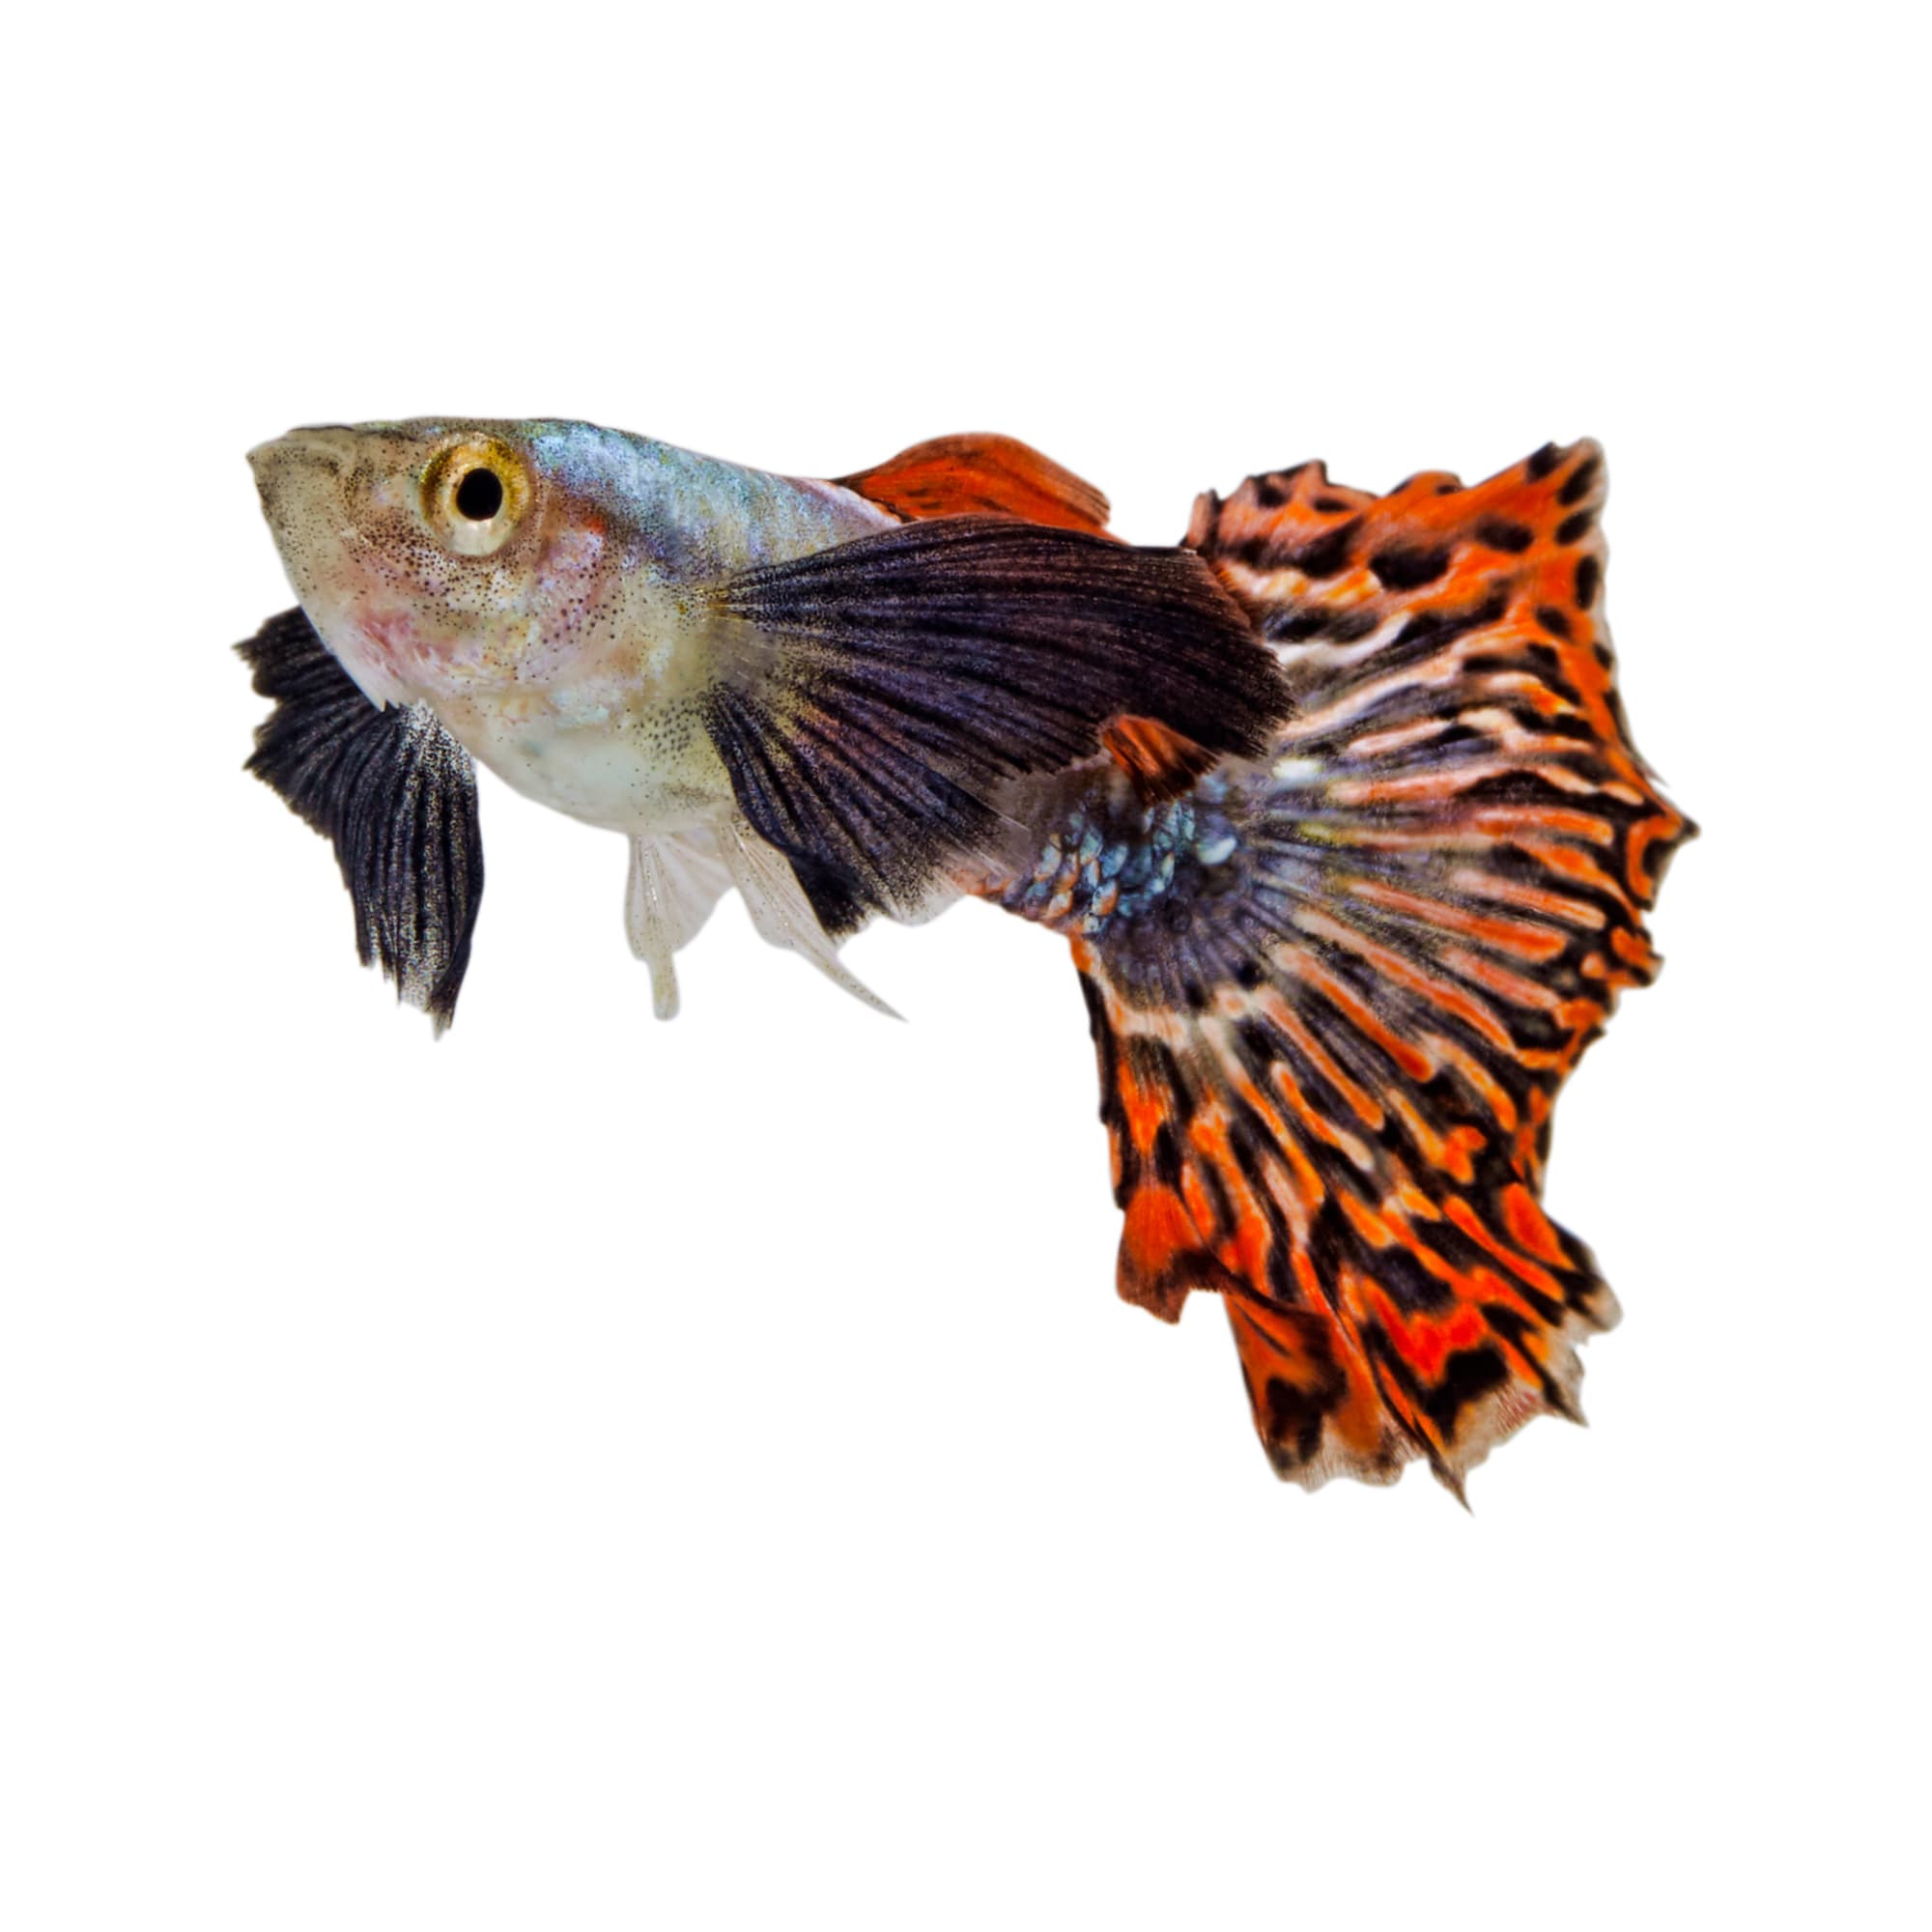 guppies for sale petco